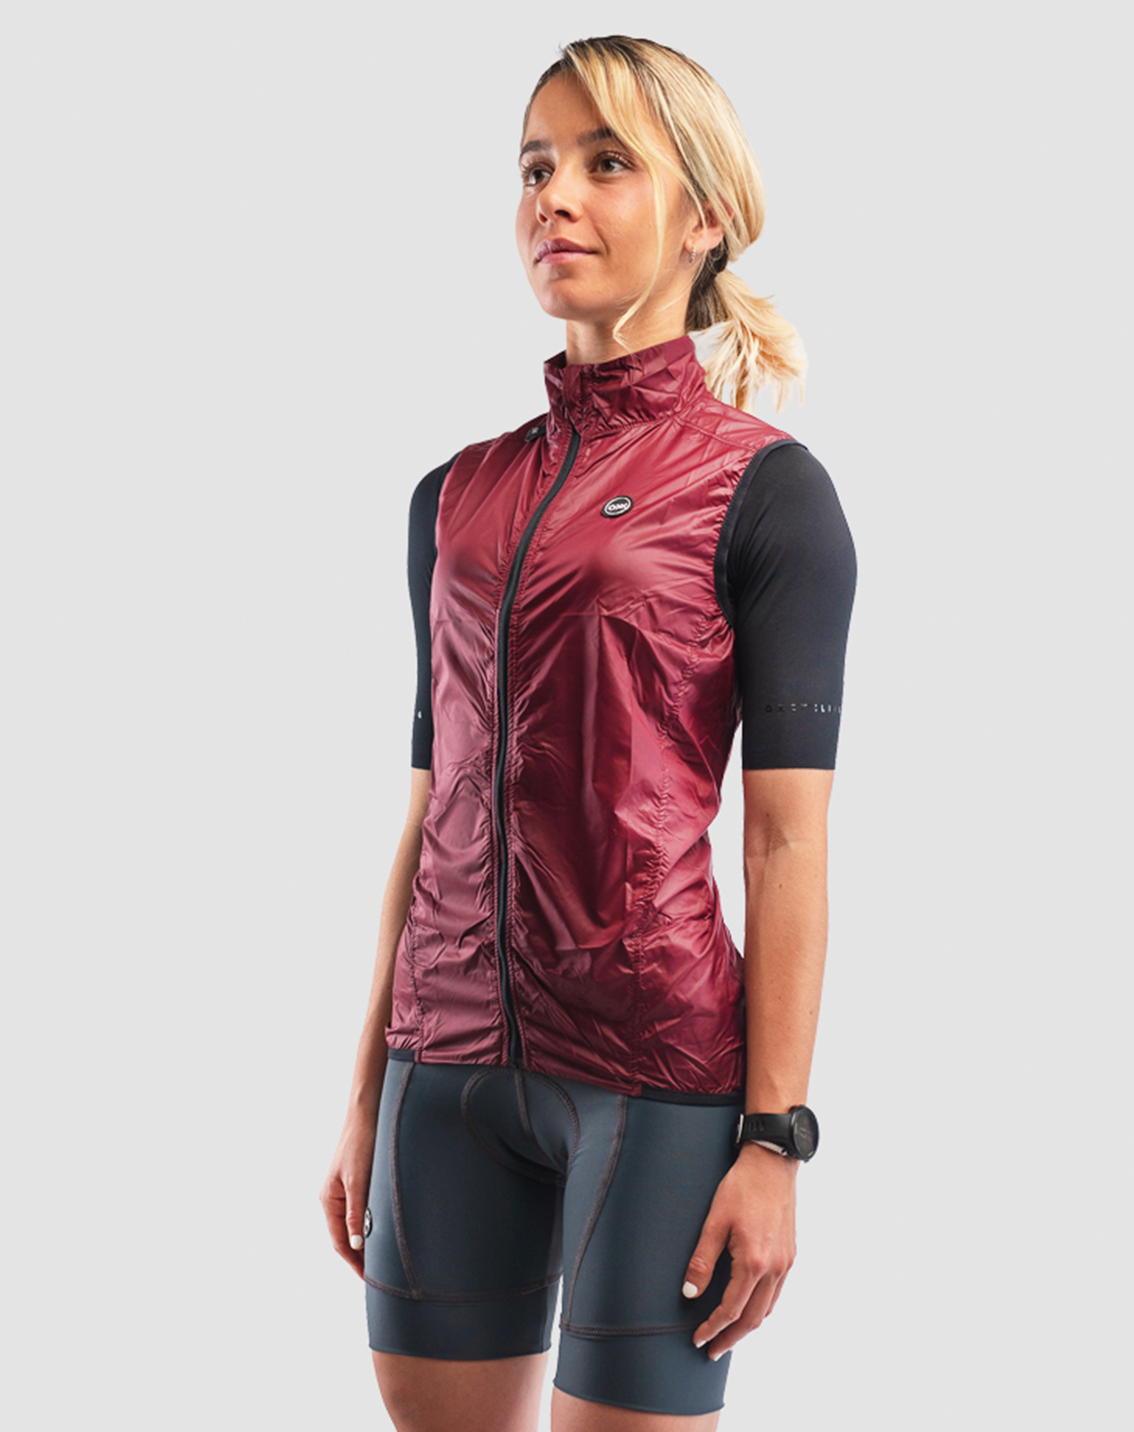 MAILLOT ONIX BORDEAUX MUJER